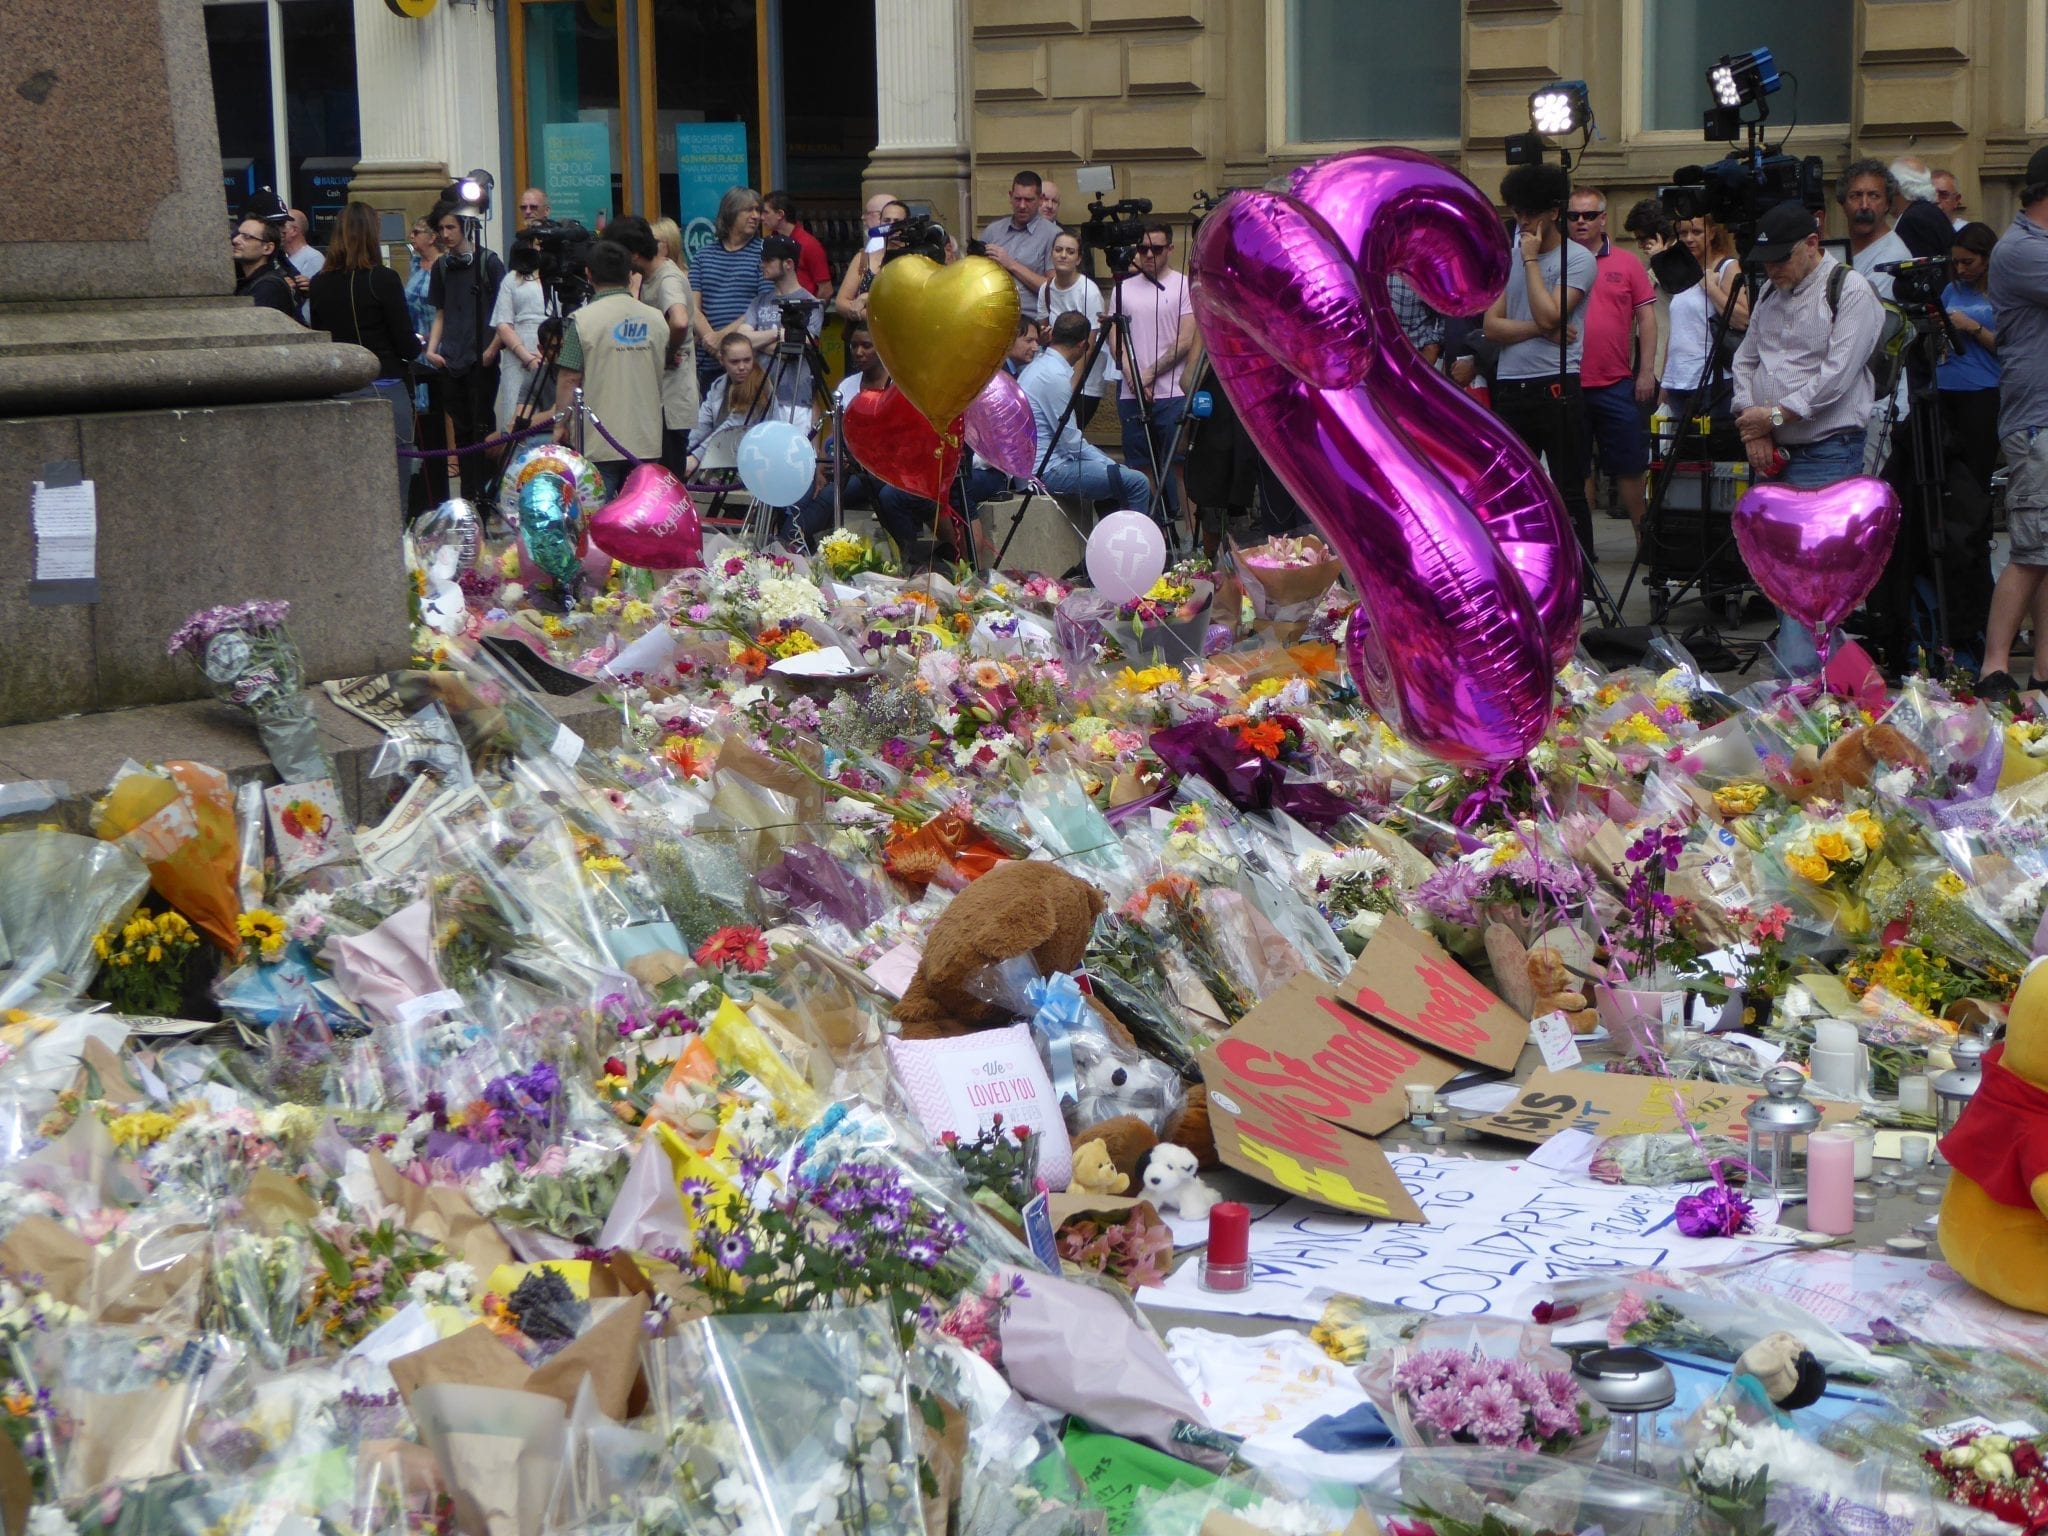 Tributes and memorials at St Ann's Square,Manchester, England, following the Manchester Arena bombing, May 2017. By Ardfern (Own work), CC BY-SA 4.0, via Wikimedia Commons, no changes.